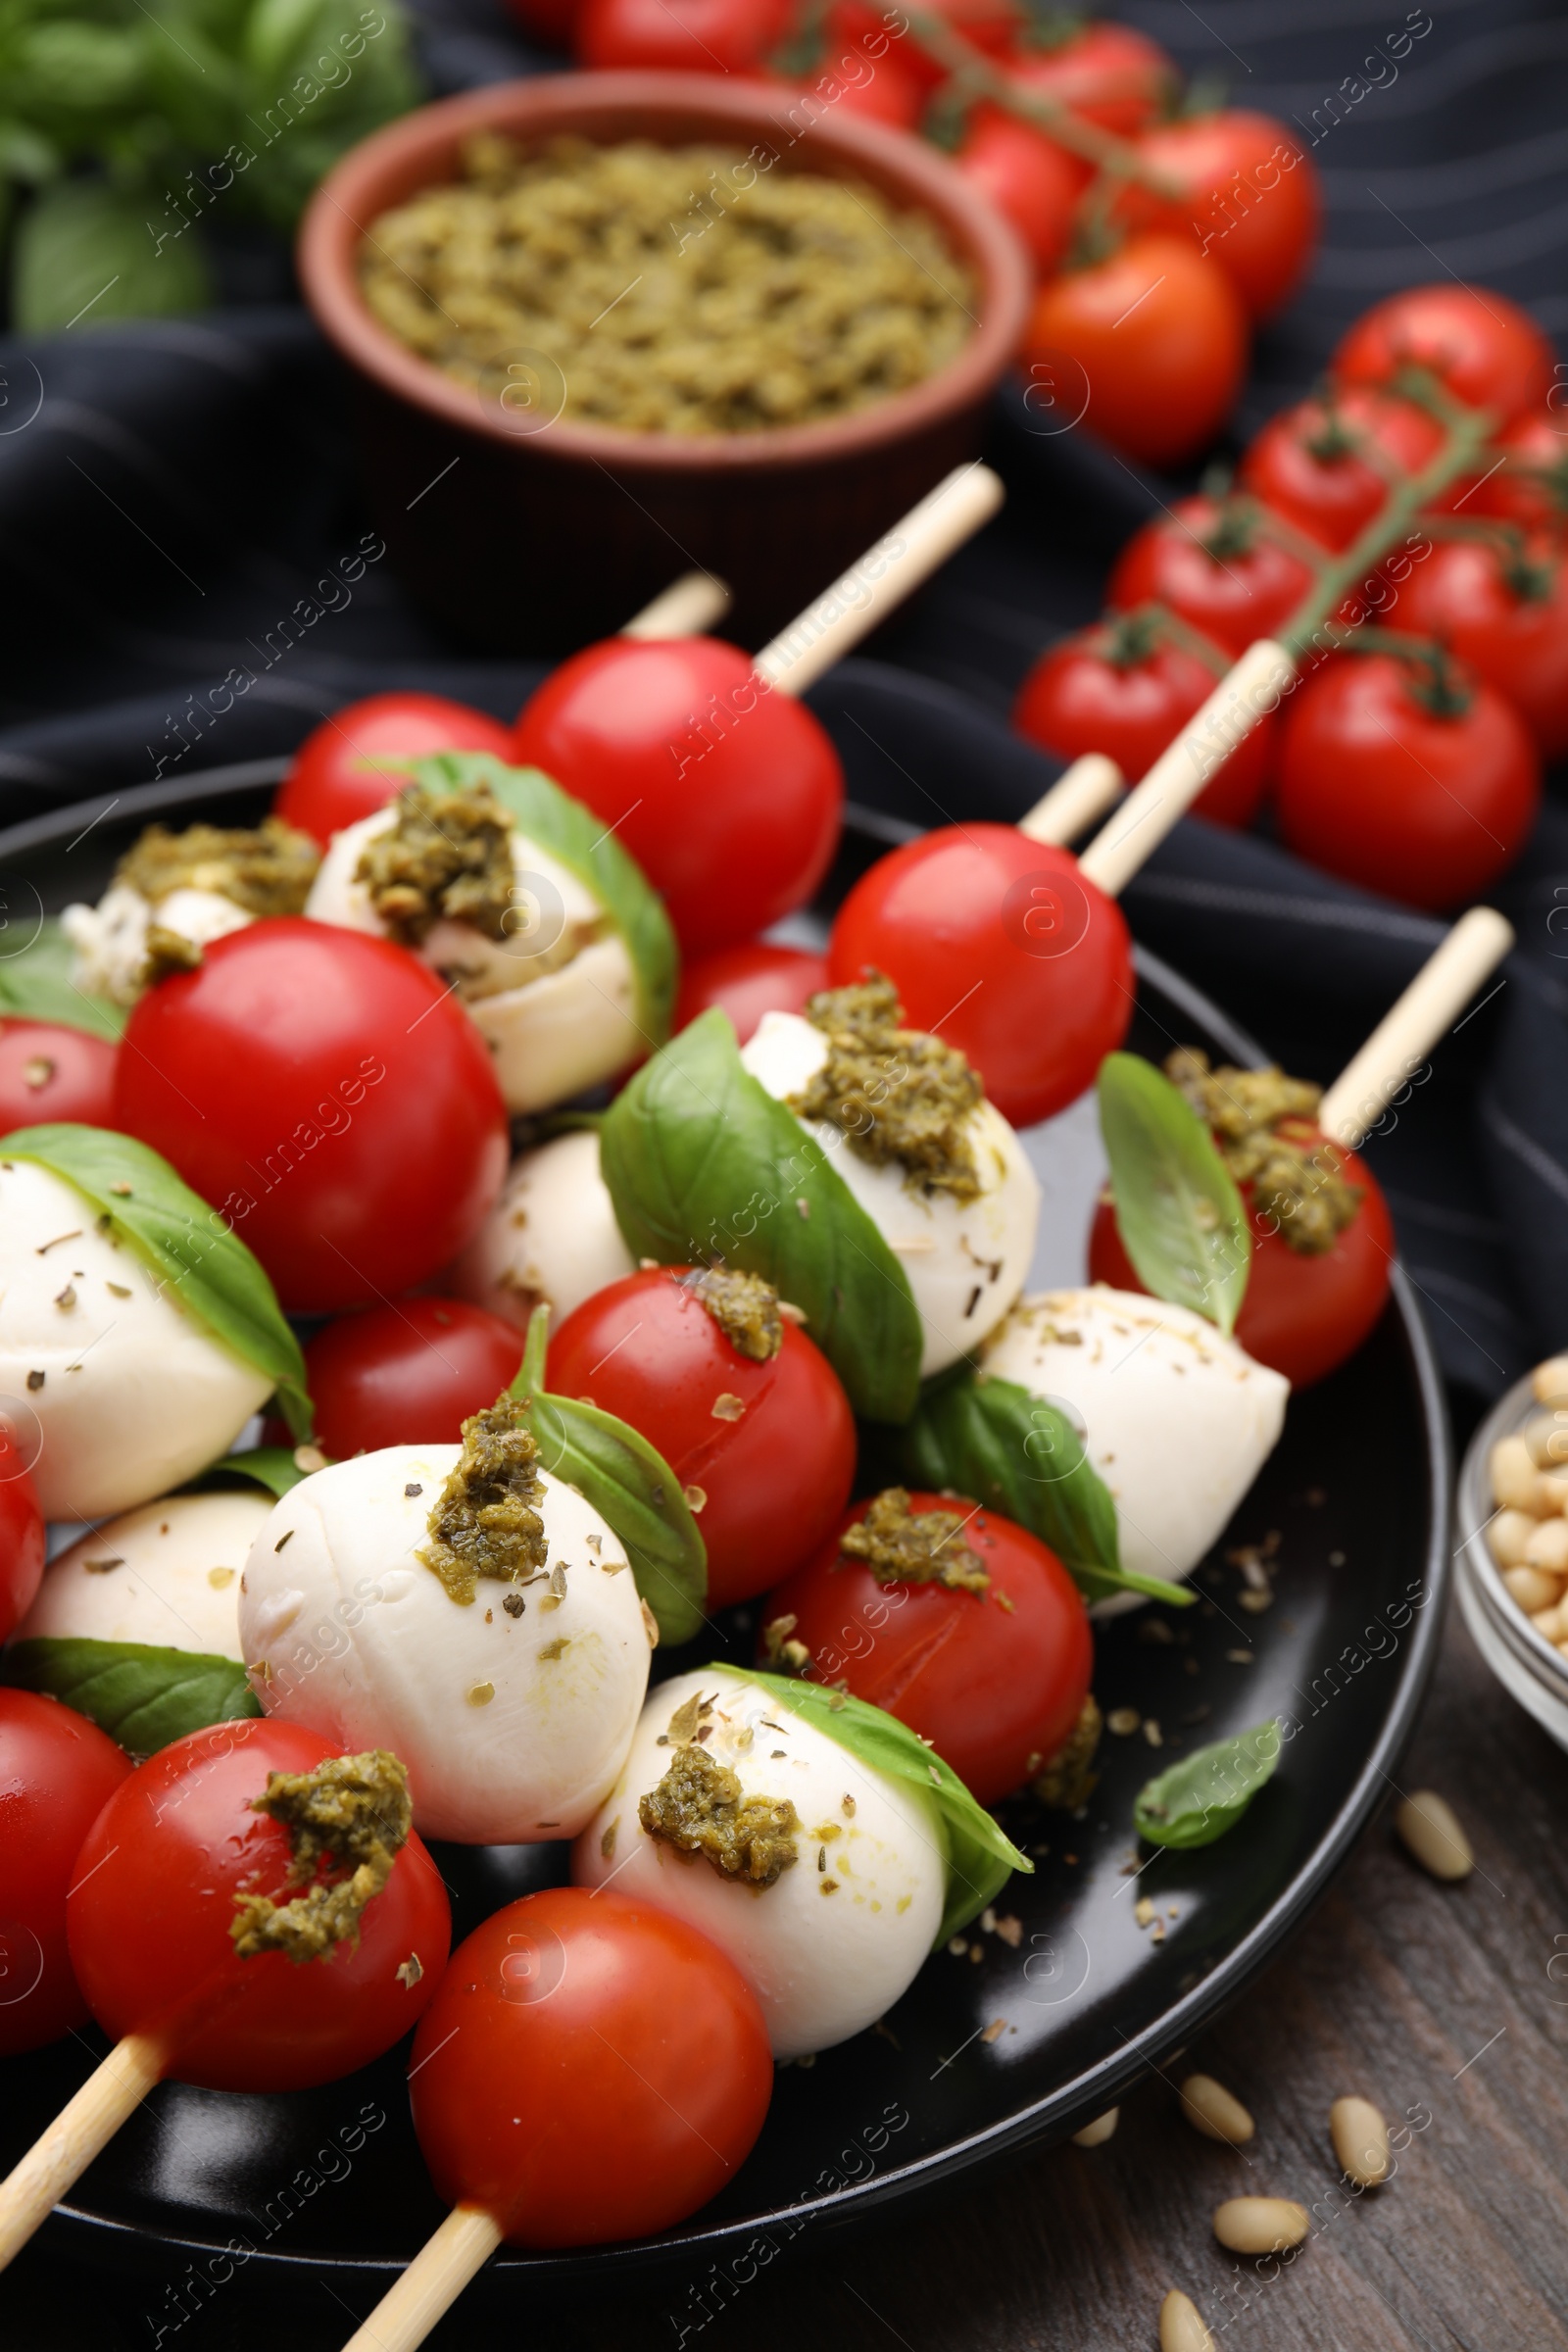 Photo of Caprese skewers with tomatoes, mozzarella balls, basil and pesto sauce on table, closeup